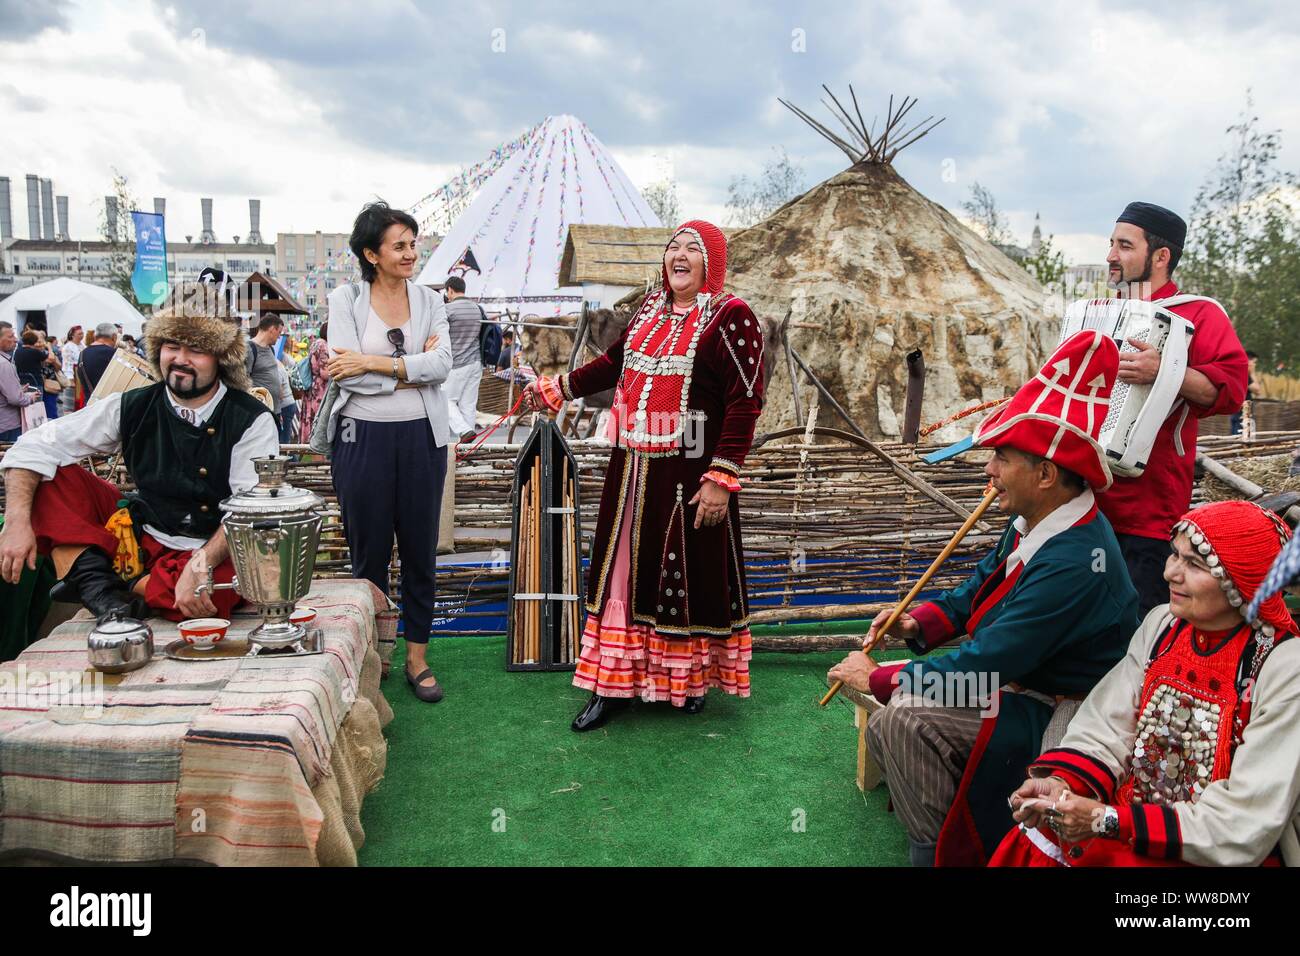 Moscow, Russia. 13th Sep, 2019. Representatives of Bashkortostan Republic perform at their site during the Russian Geographical Society Festival at Zaryadye park in Moscow, Russia, on Sept. 13, 2019. The 4th Russian Geographical Society Festival is held from Sept. 13 to Sept. 22 in Moscow. Visitors will be able to get acquainted with the diverse nature and cultural heritage of Russia during the festival. Credit: Maxim Chernavsky/Xinhua Stock Photo